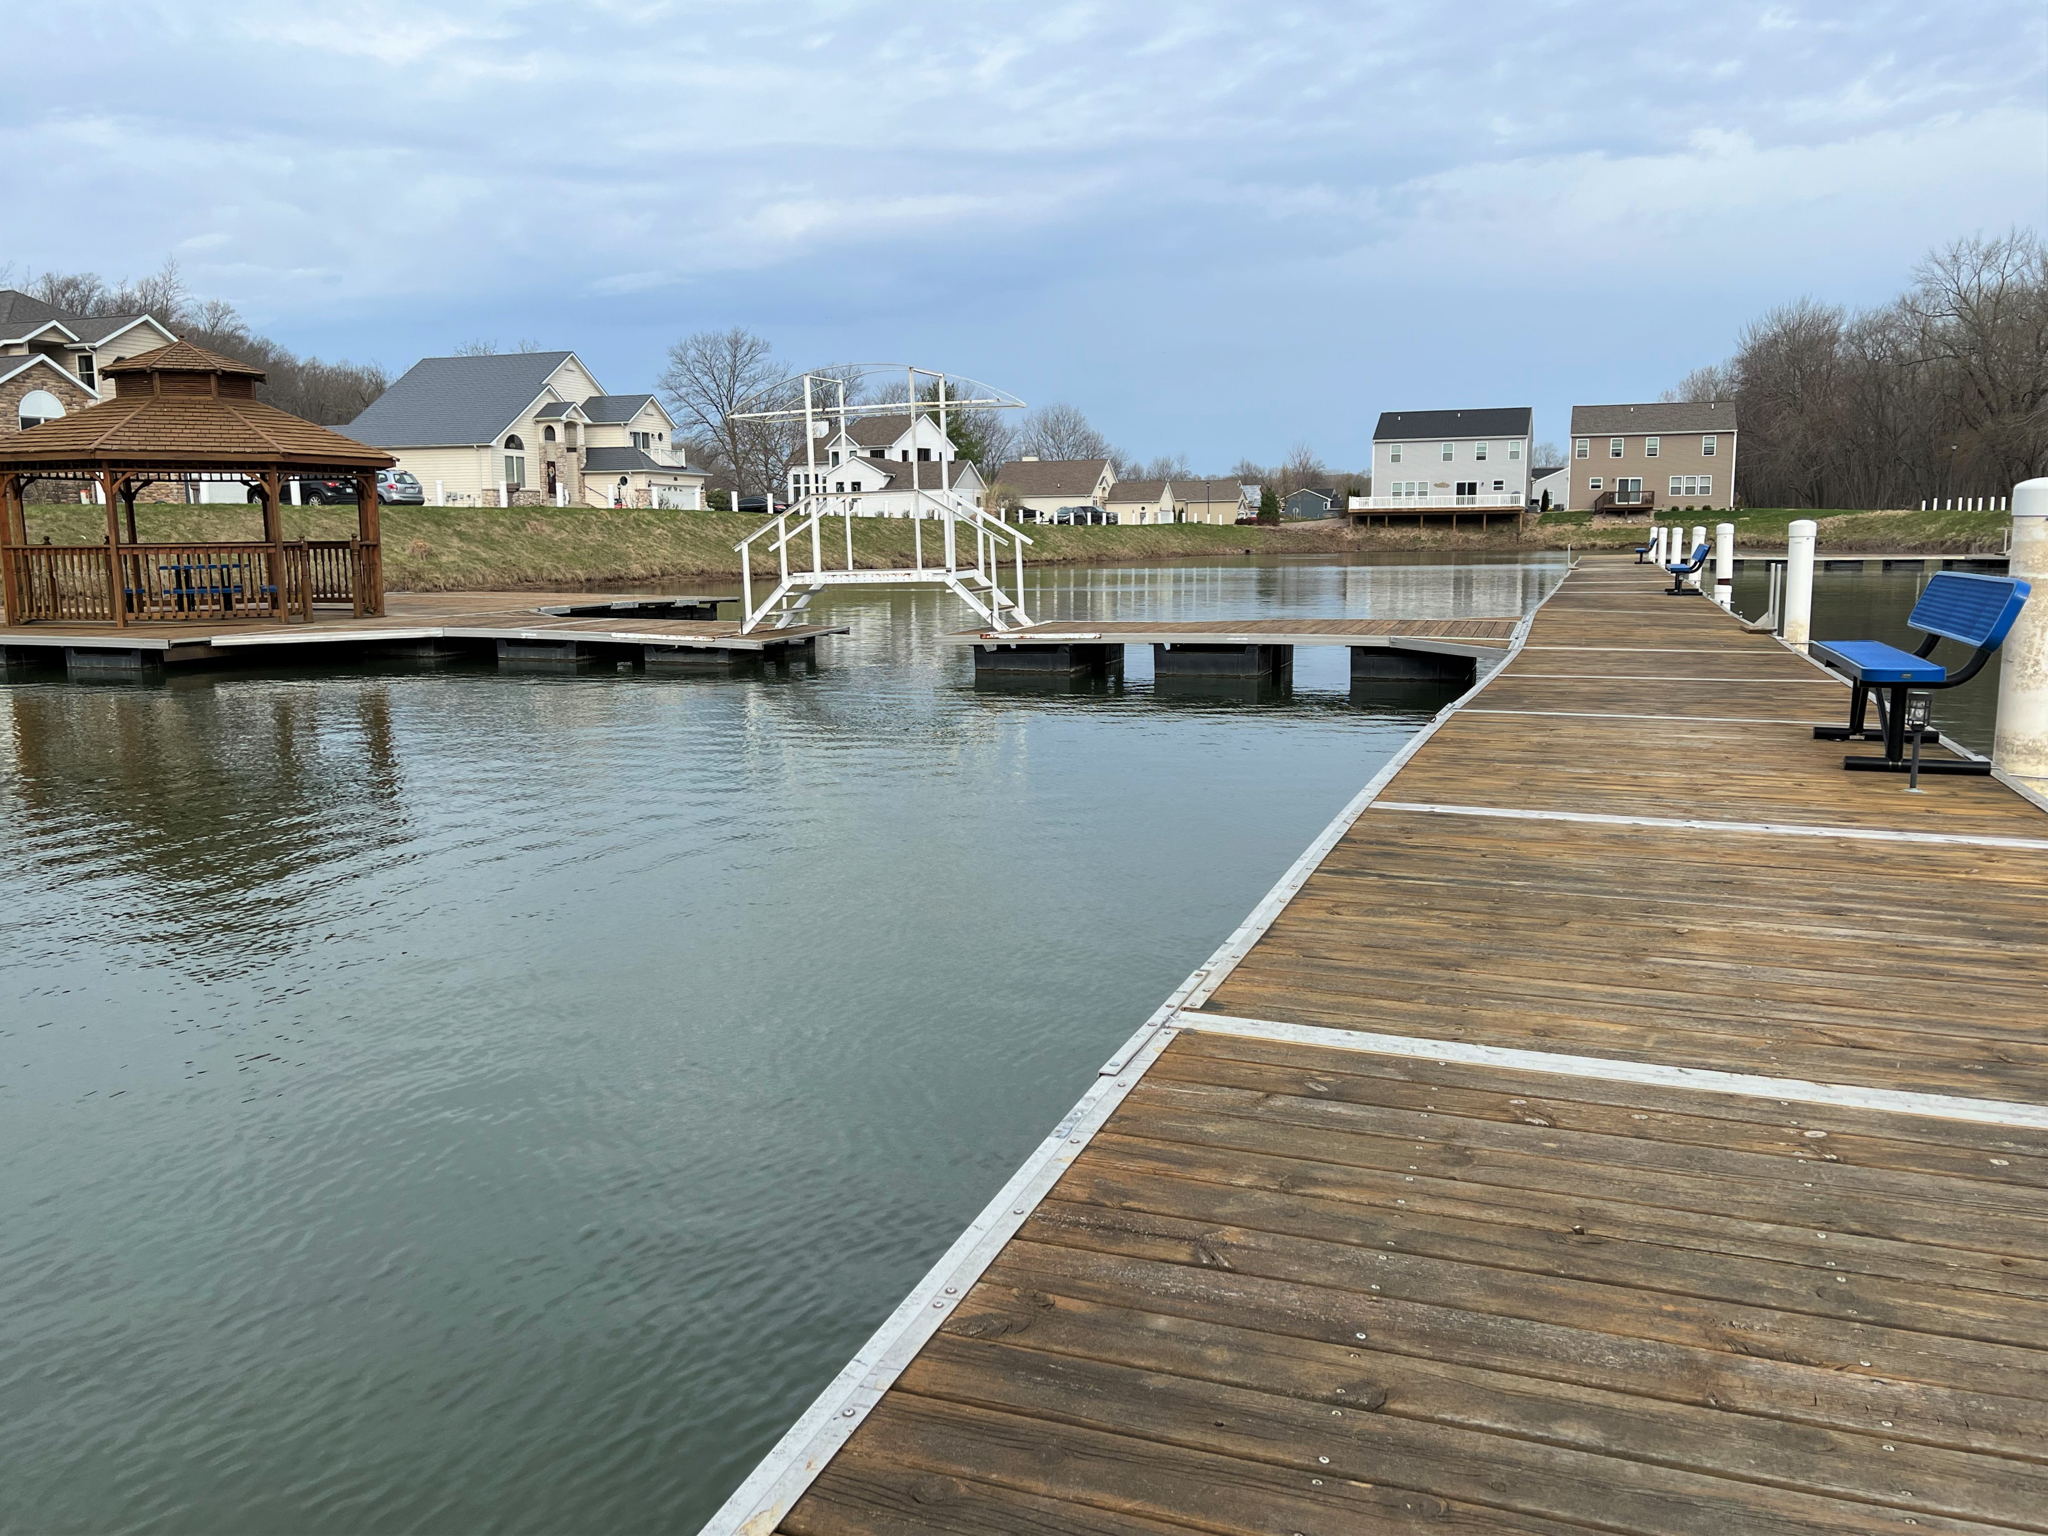 Community Ponds with docks, benches